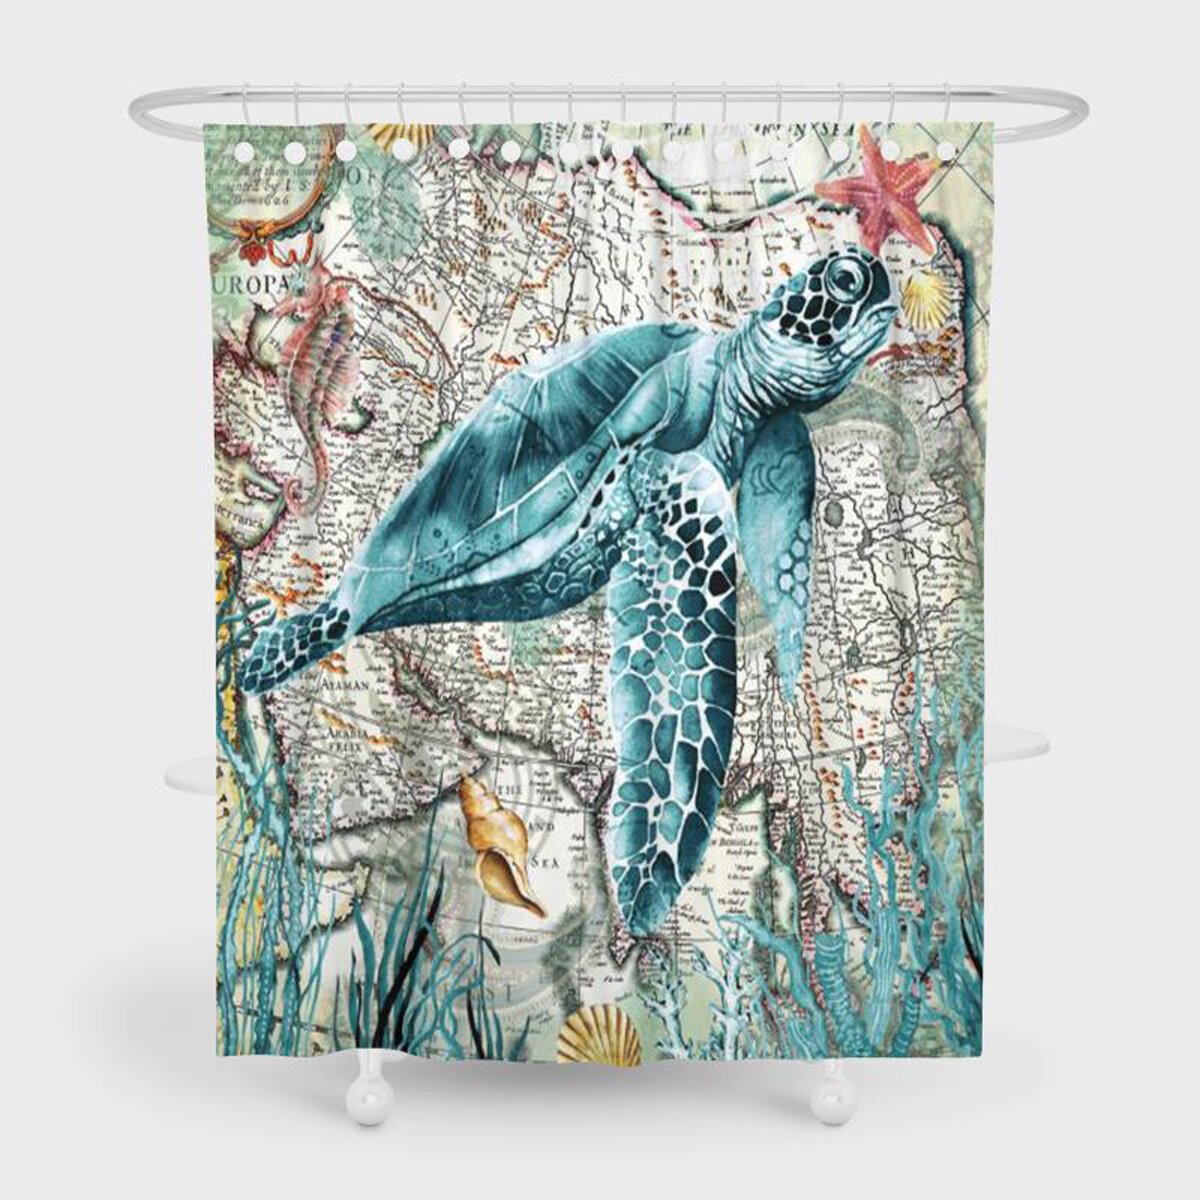 180 x 180cm Turtles/ Whale Printed Pattern Shower Curtain Waterproof Bathroom Decorative Curtains with 12 Hooks